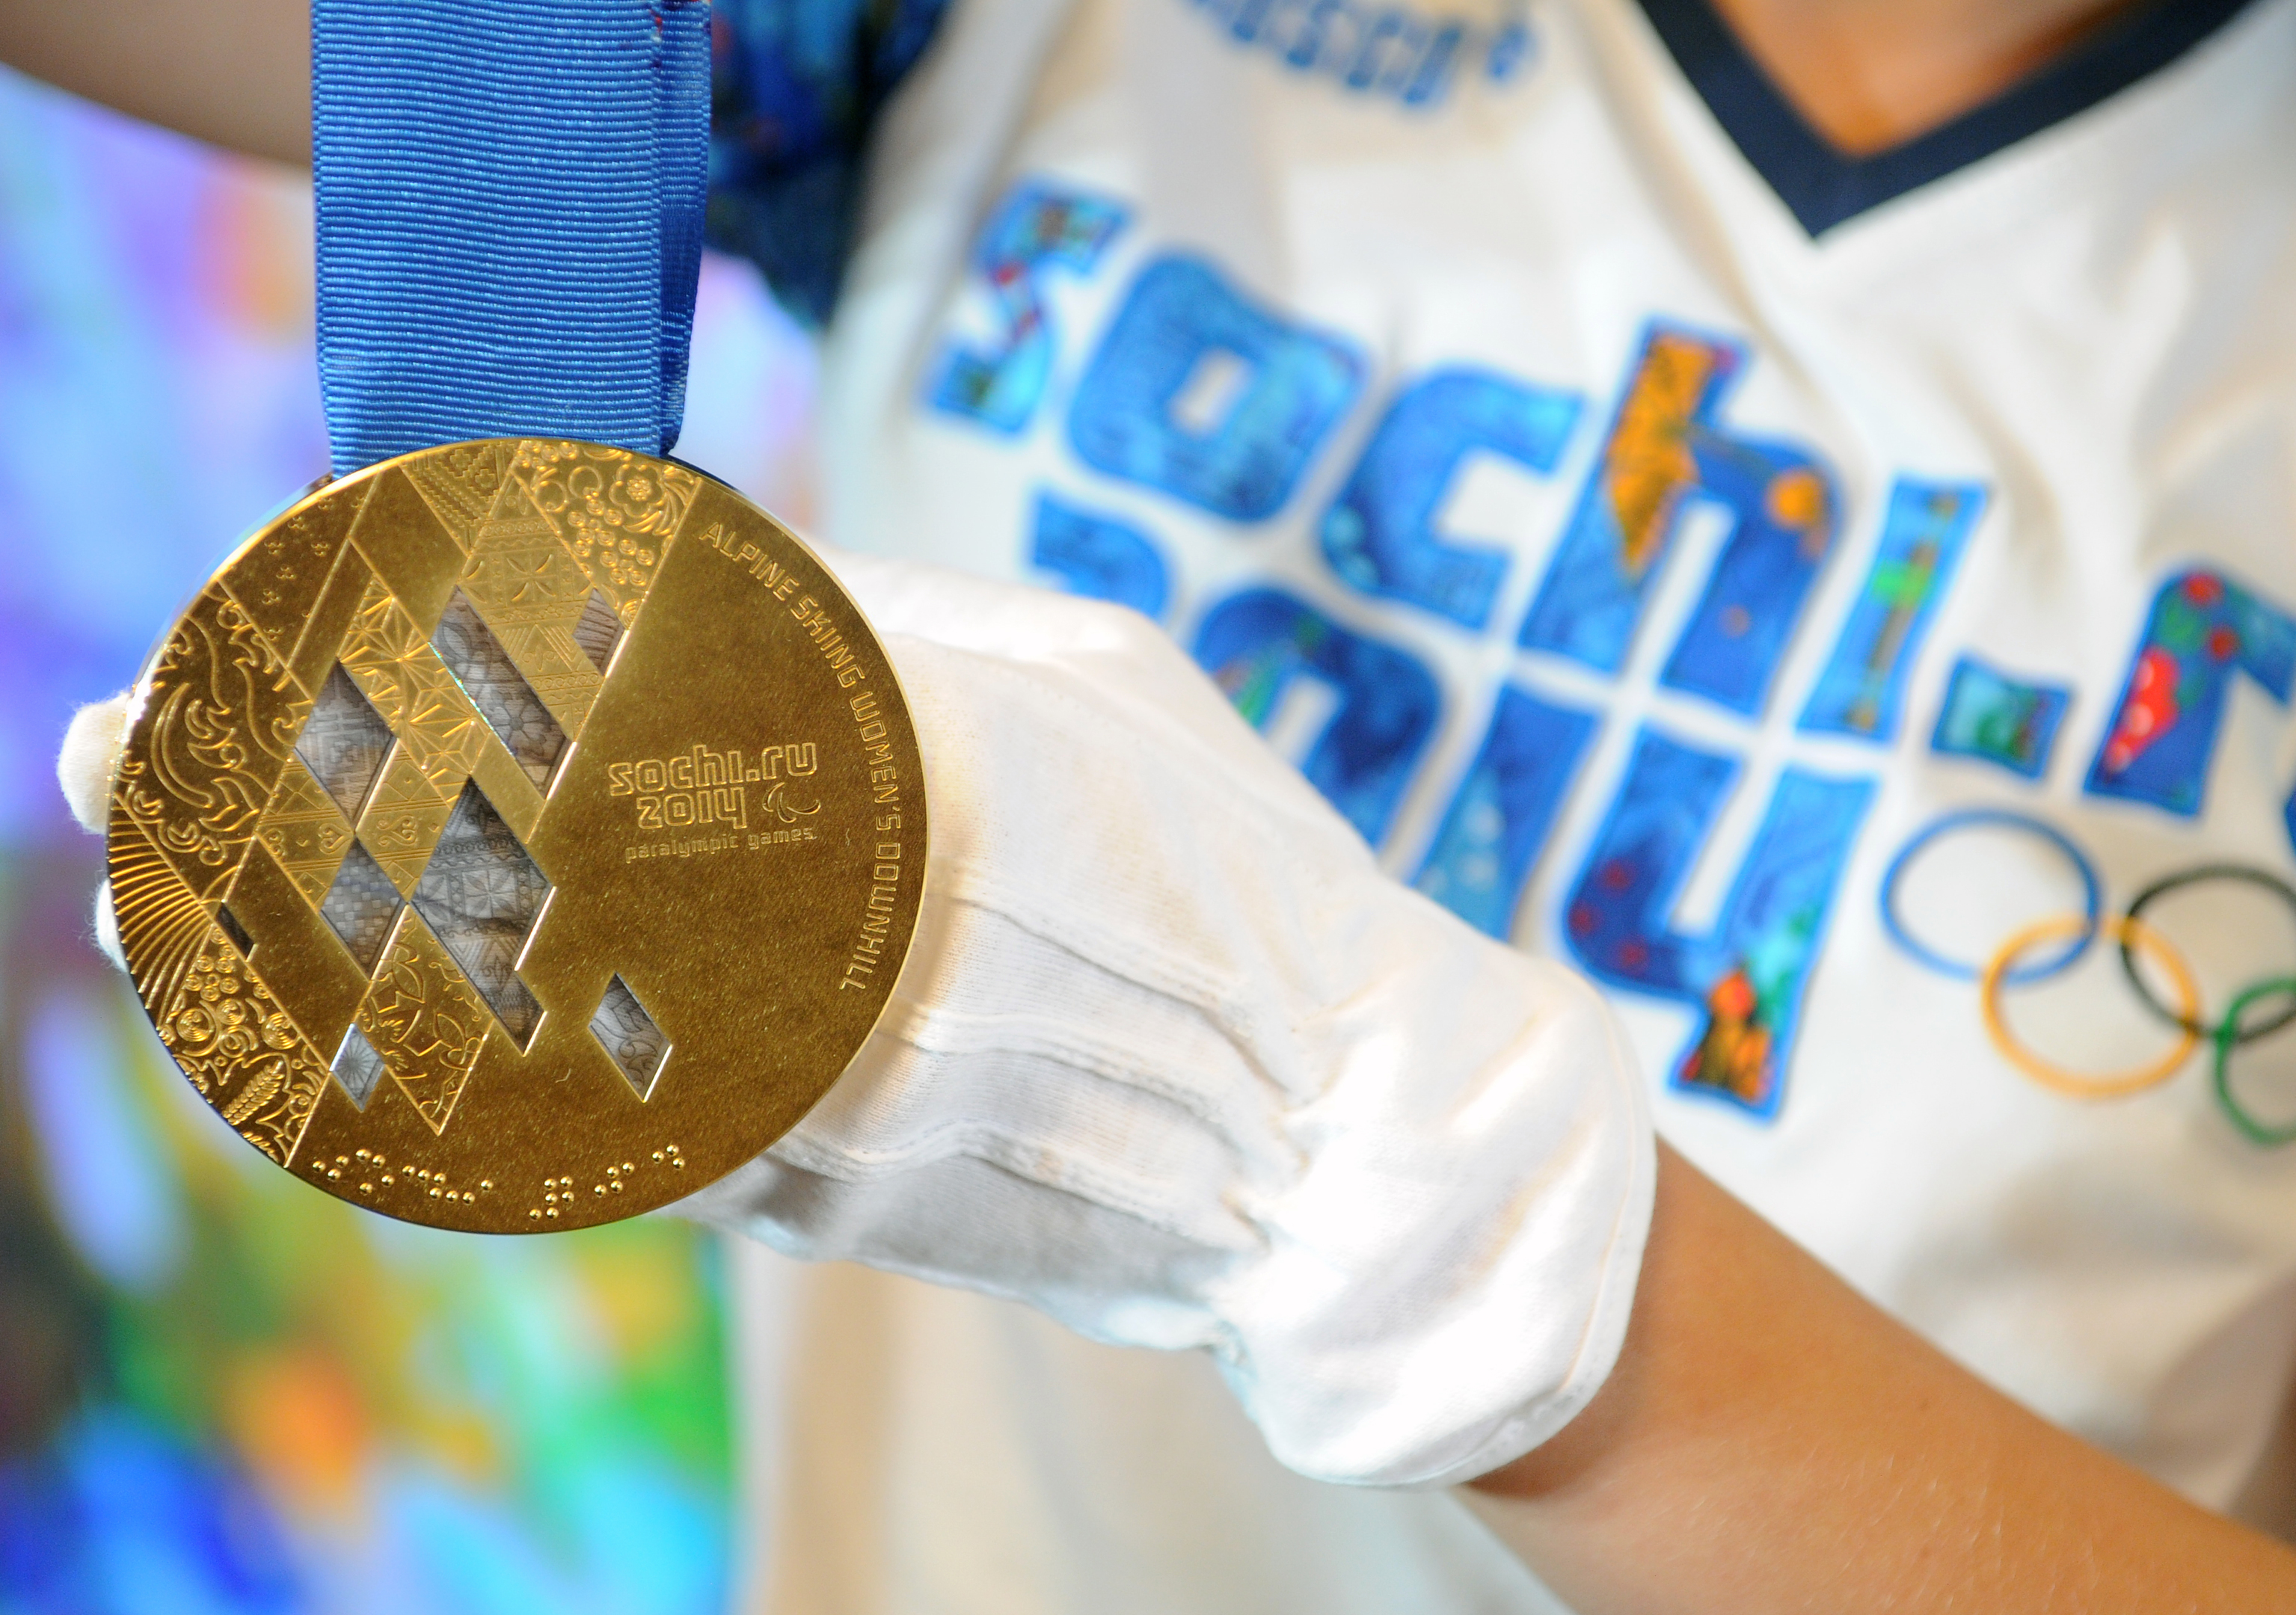 One of the Sochi Winter Olympic gold medals.